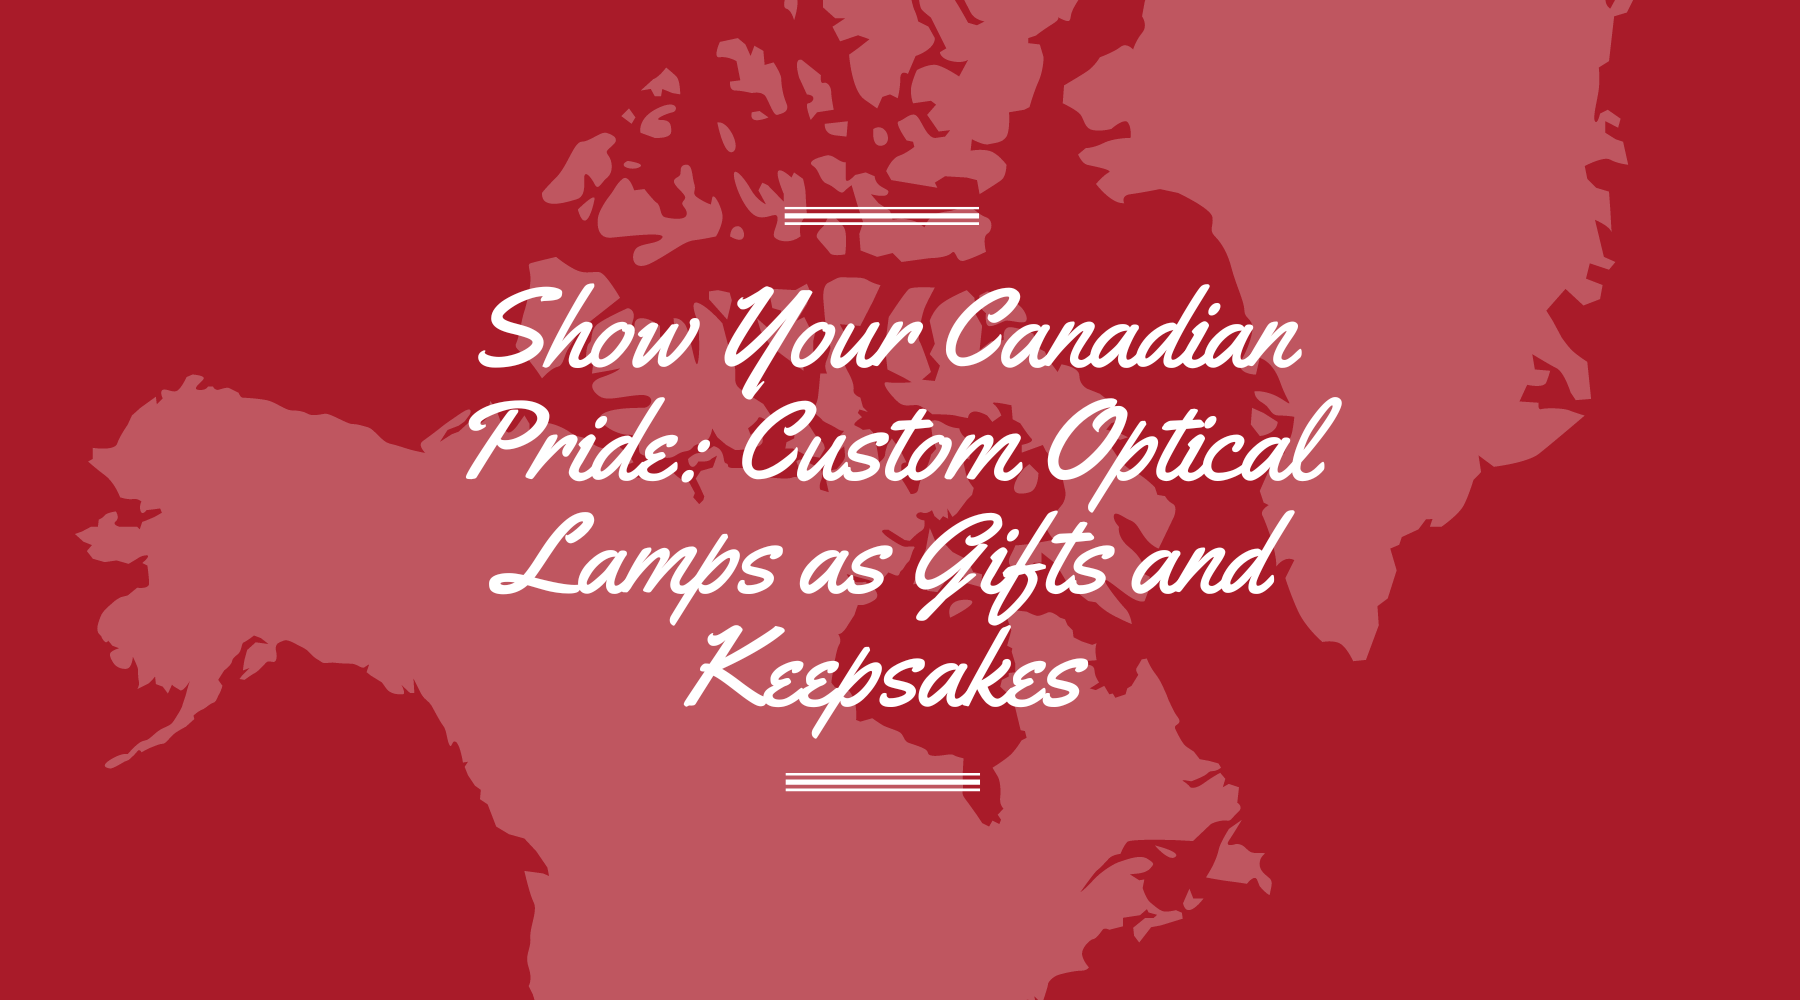 Show Your Canadian Pride: Custom Optical Lamps as Gifts and Keepsakes